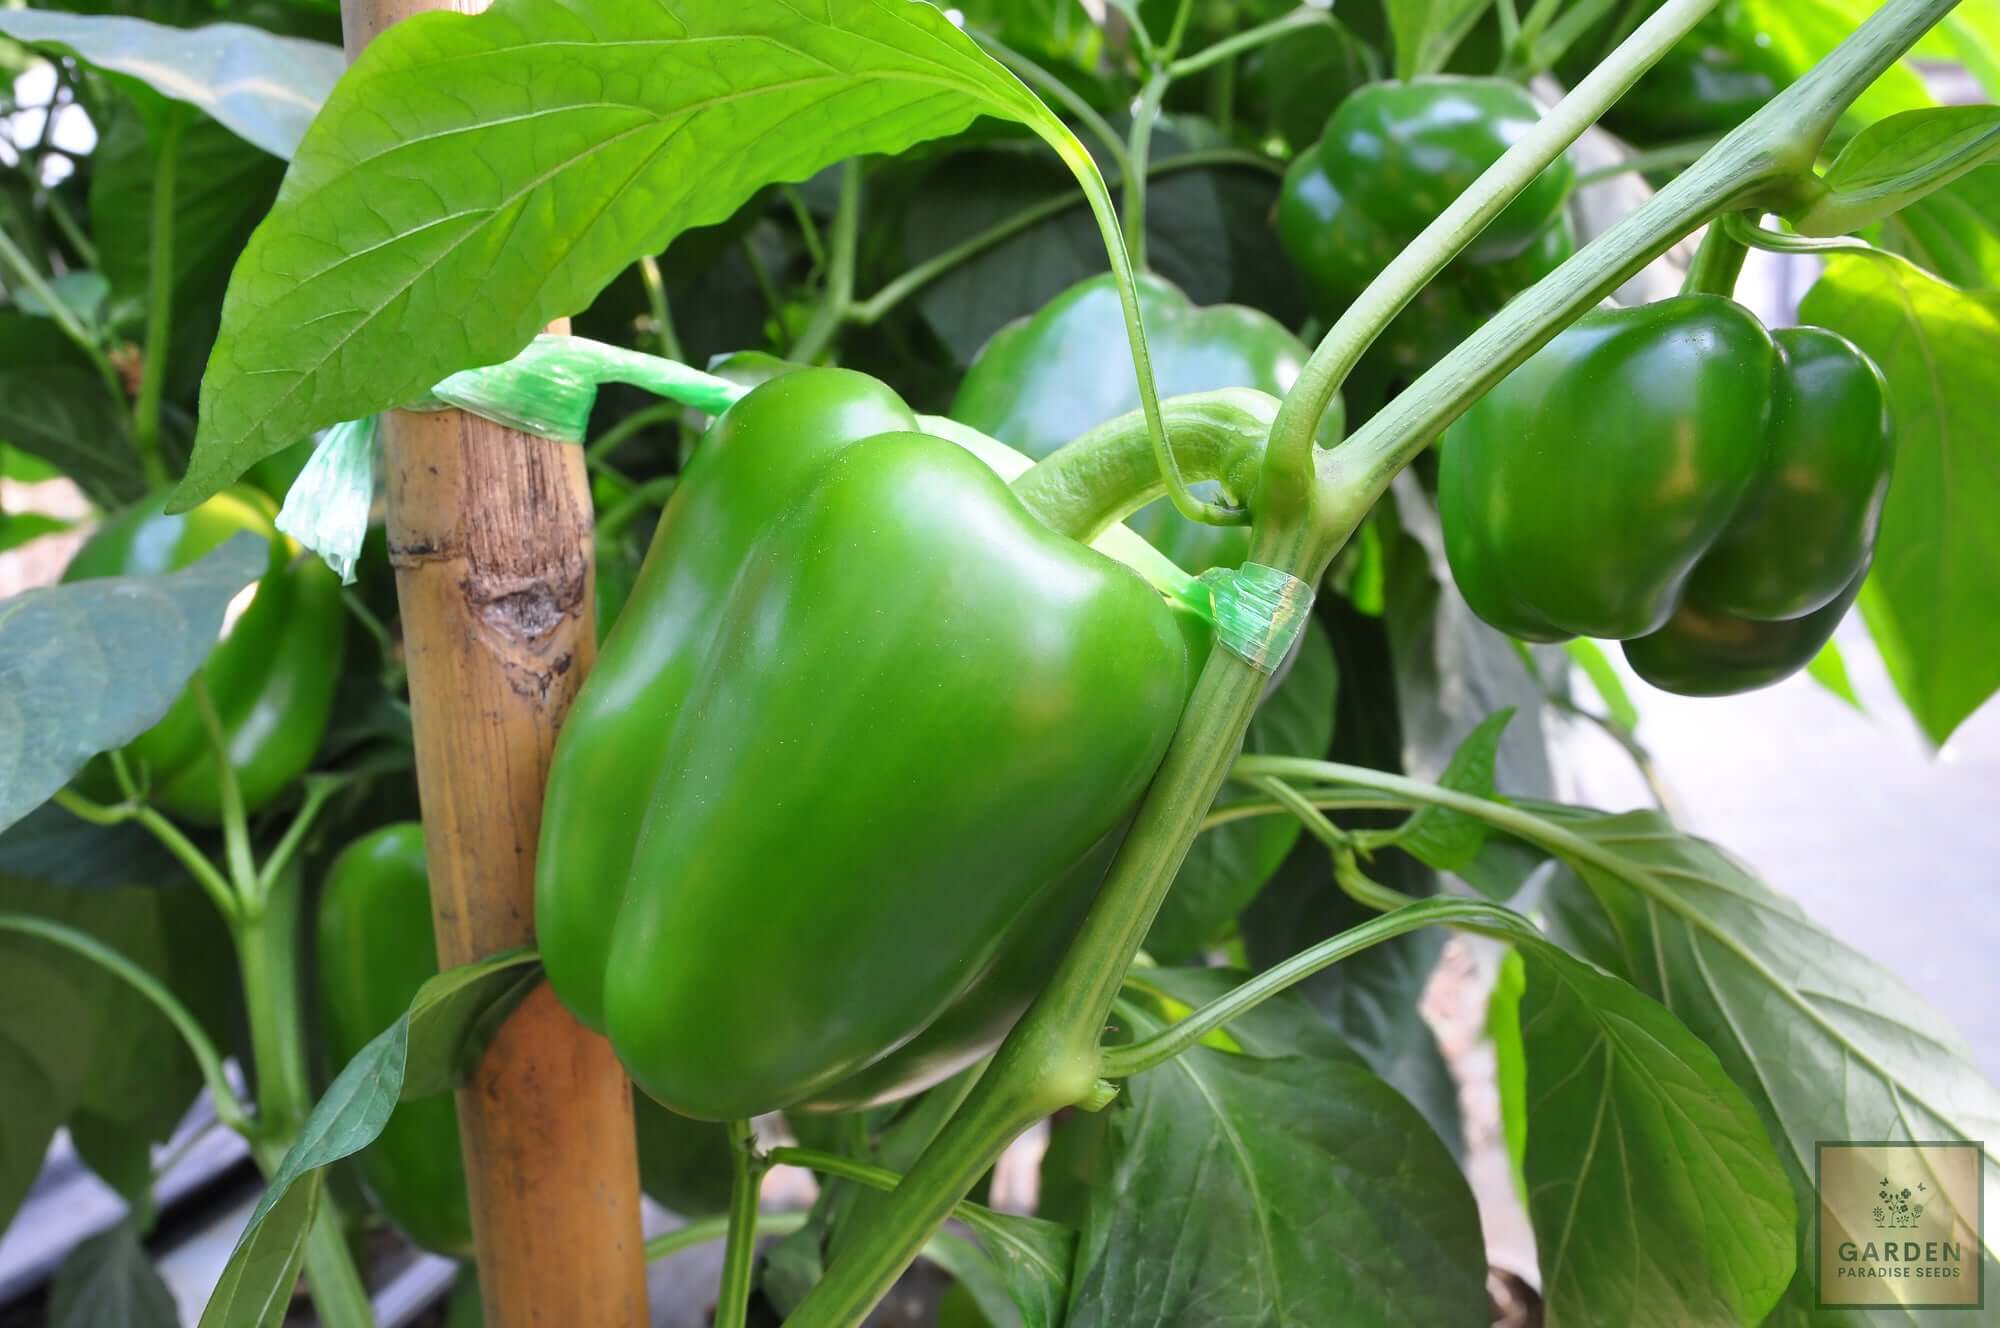 Premium Green Bell Pepper Seeds - Start a flavorful and colorful harvest with these high-quality seeds